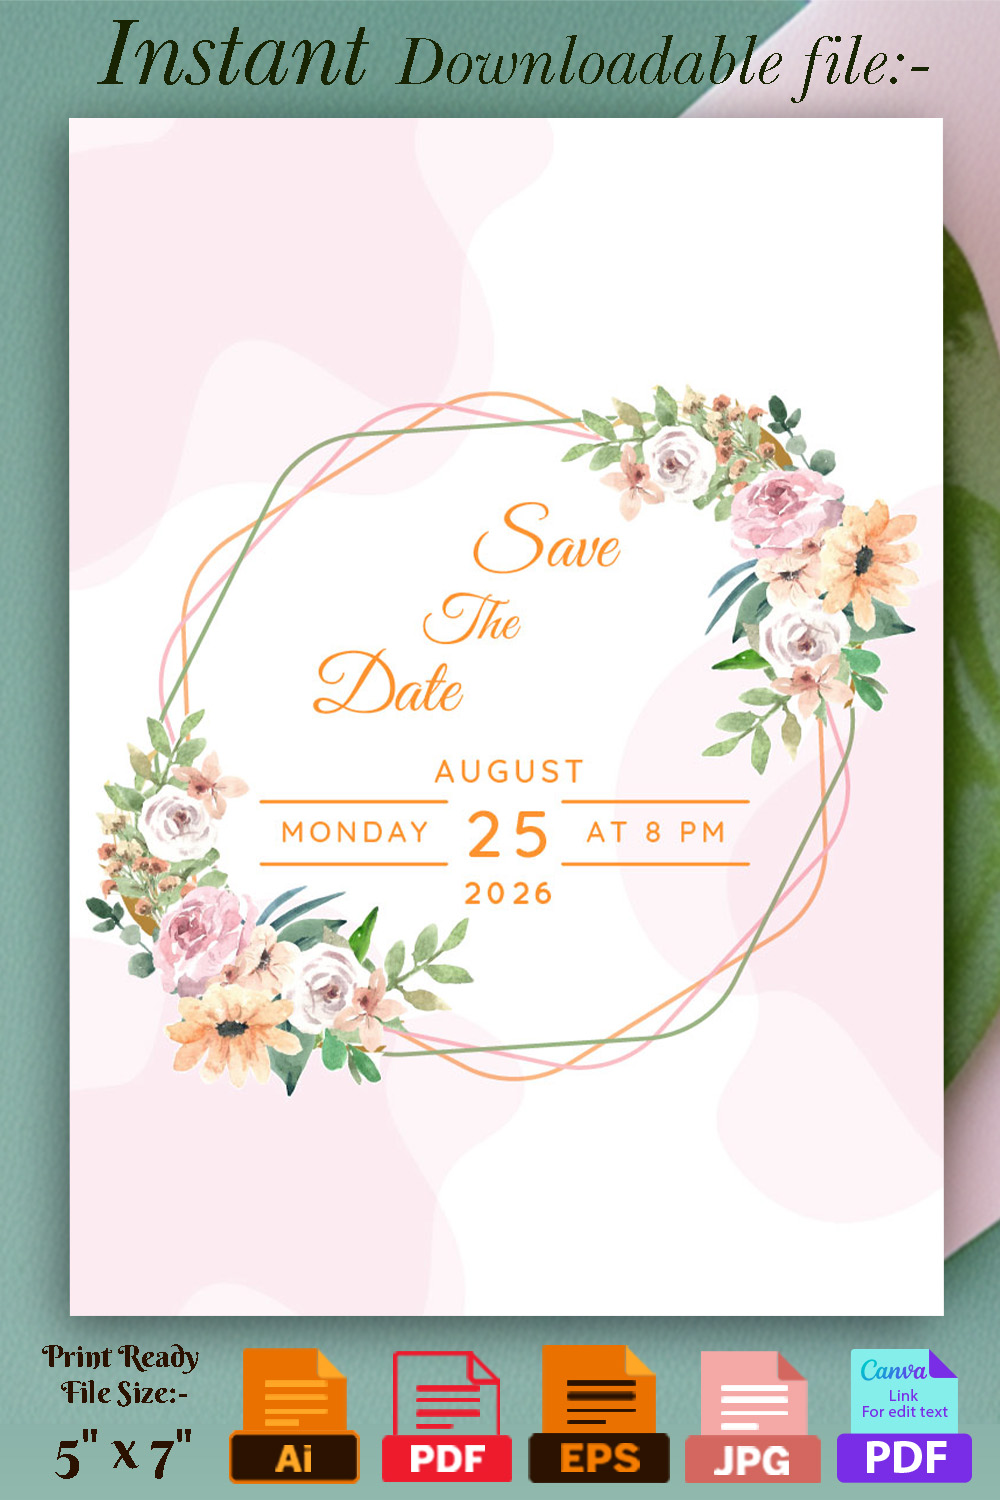 Image with charming wedding invitation with flowers and leaves.